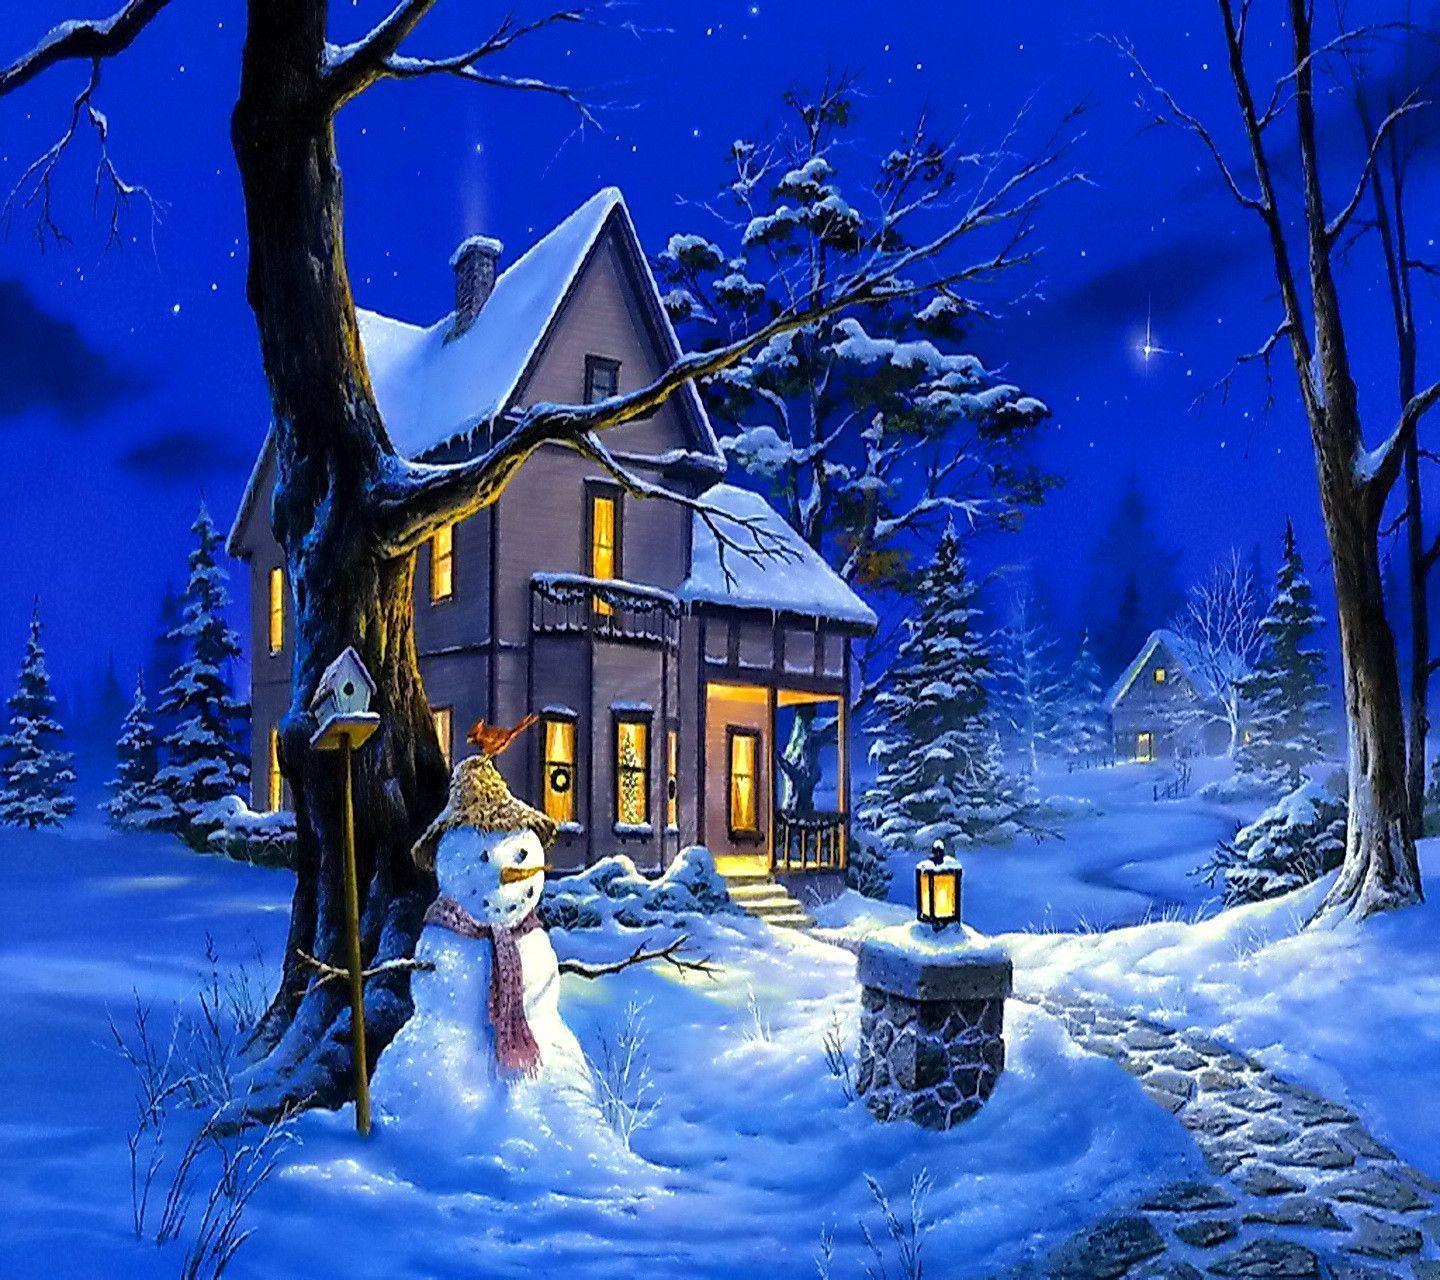 Christmas Night Wallpaper 1920X1080 Find images of christmas night